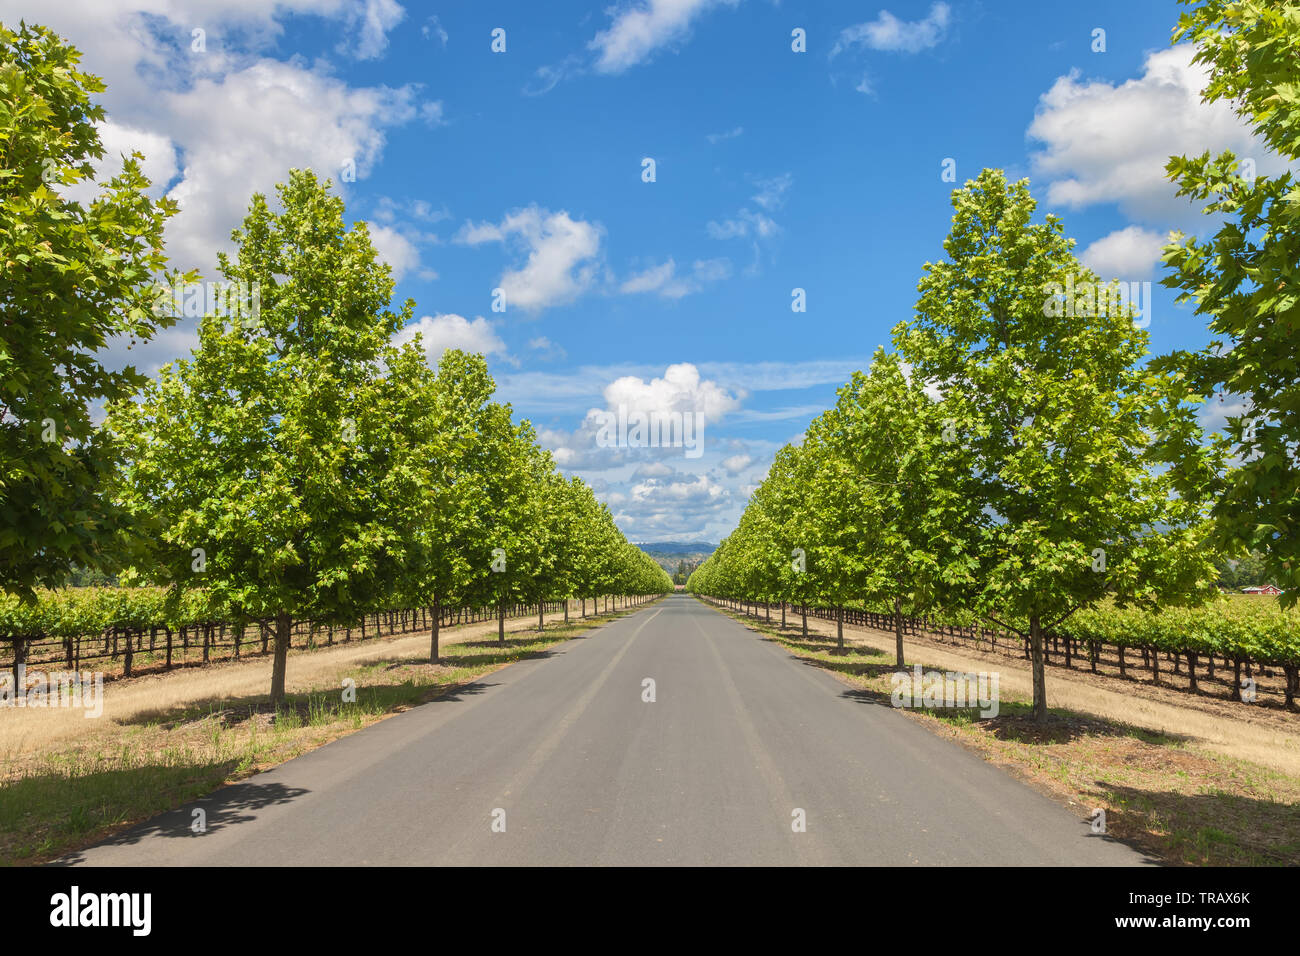 Entrance road, with rows of London planetrees, into Inglenook winery, Yountville, California, United States. Stock Photo